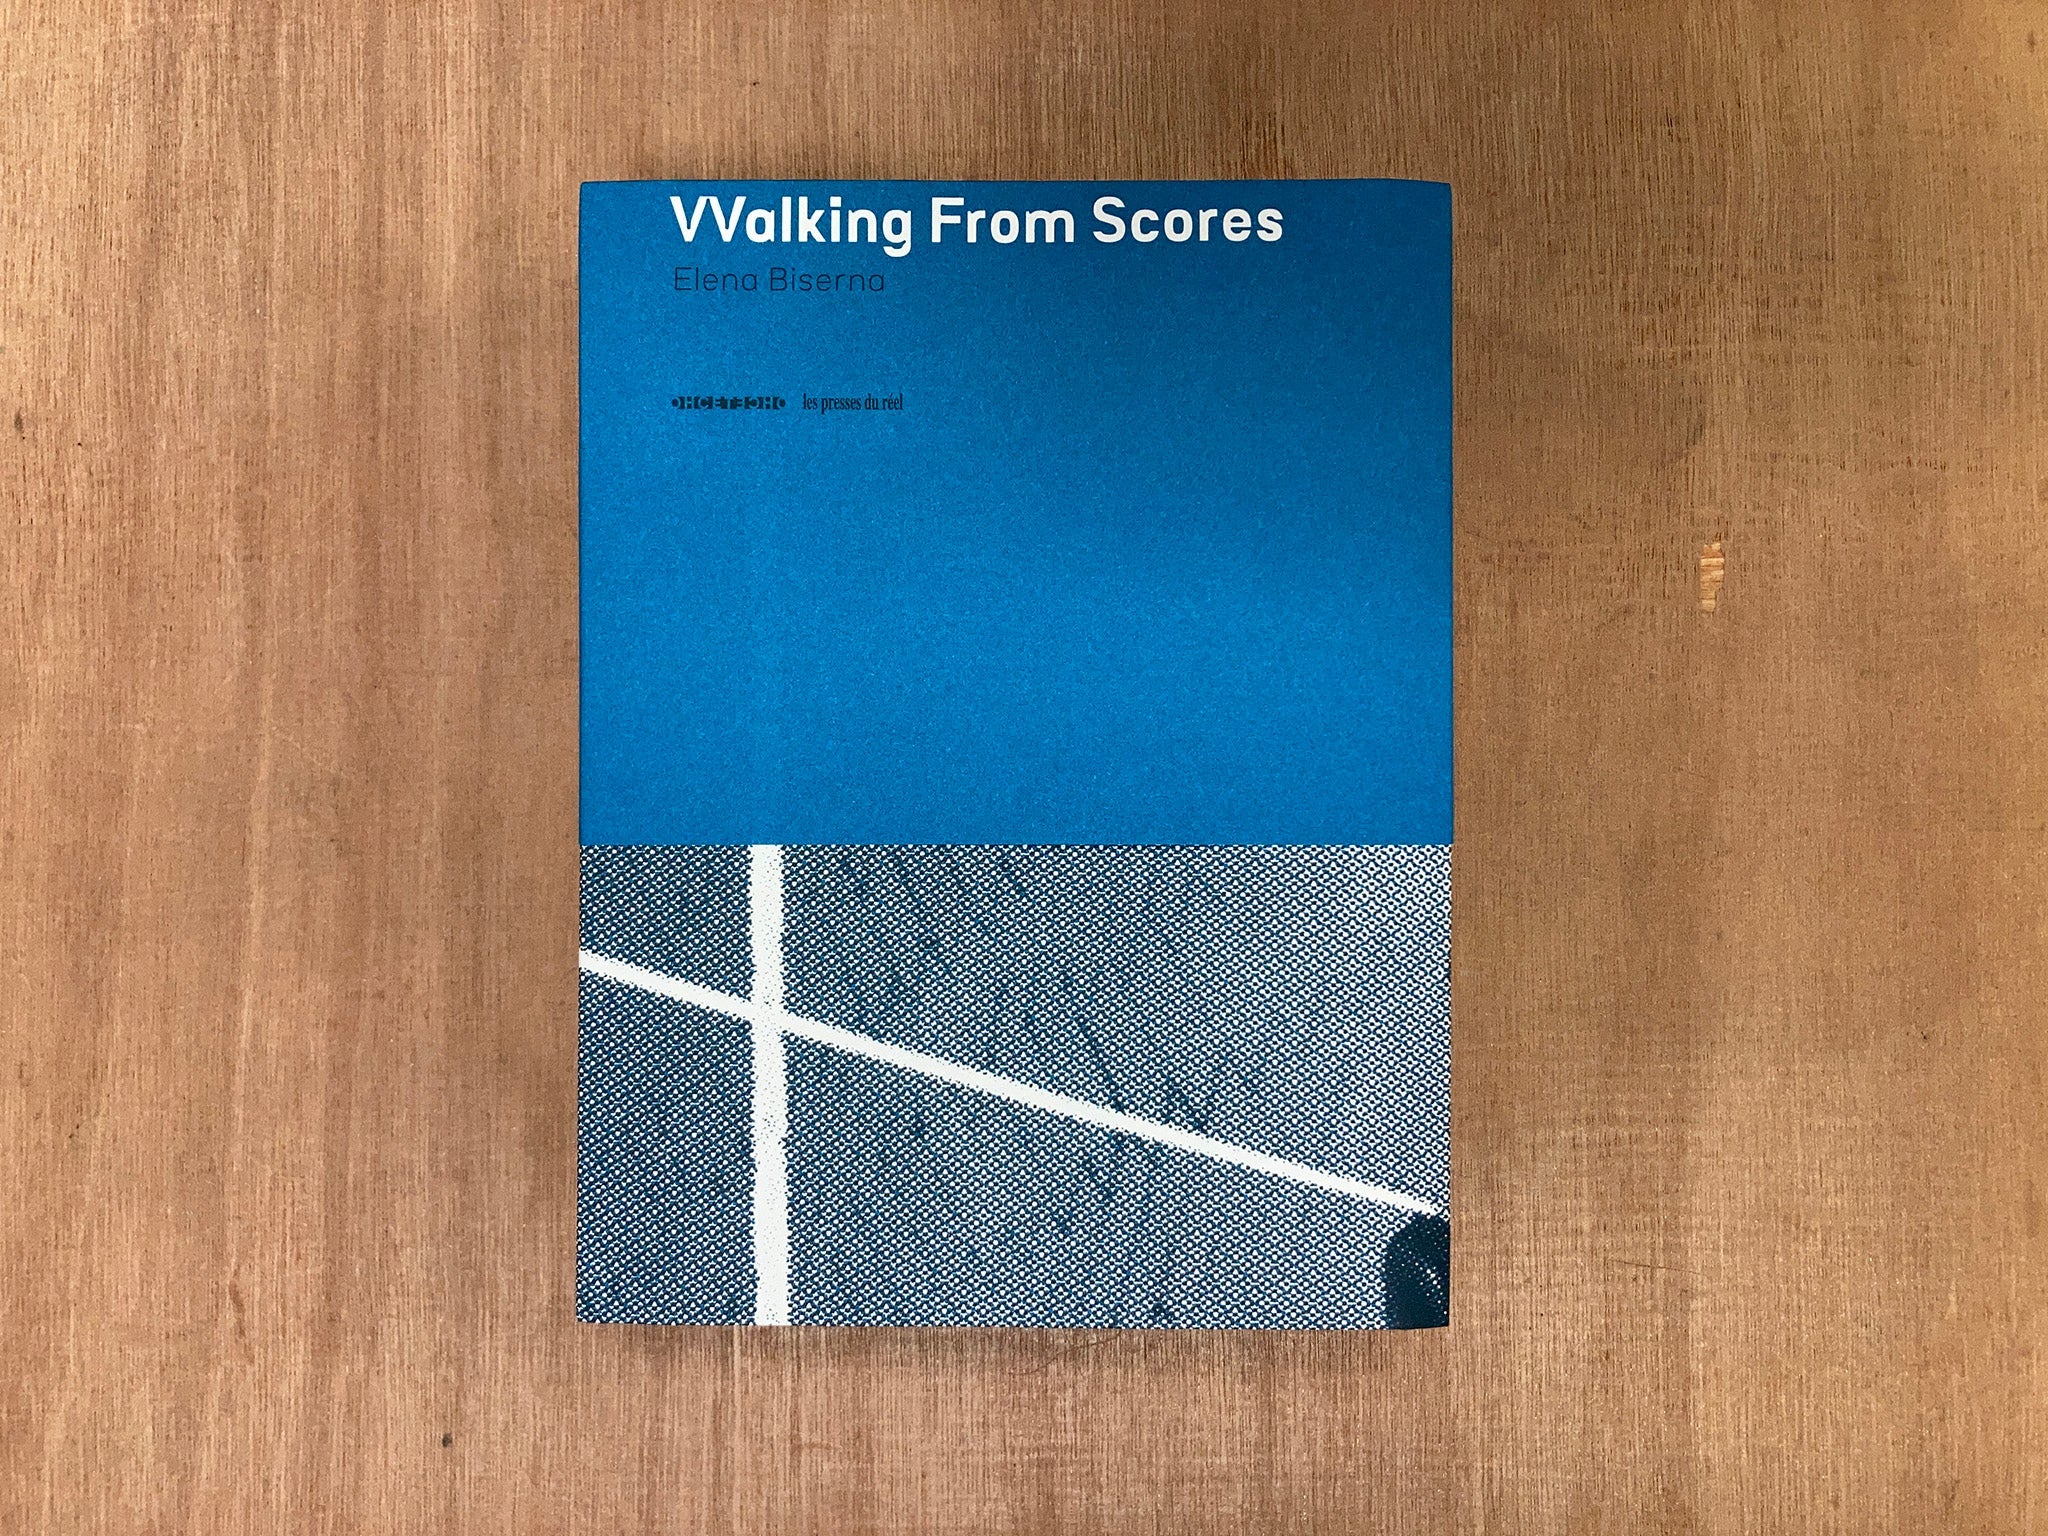 WALKING FROM SCORES edited by Elena Biserna